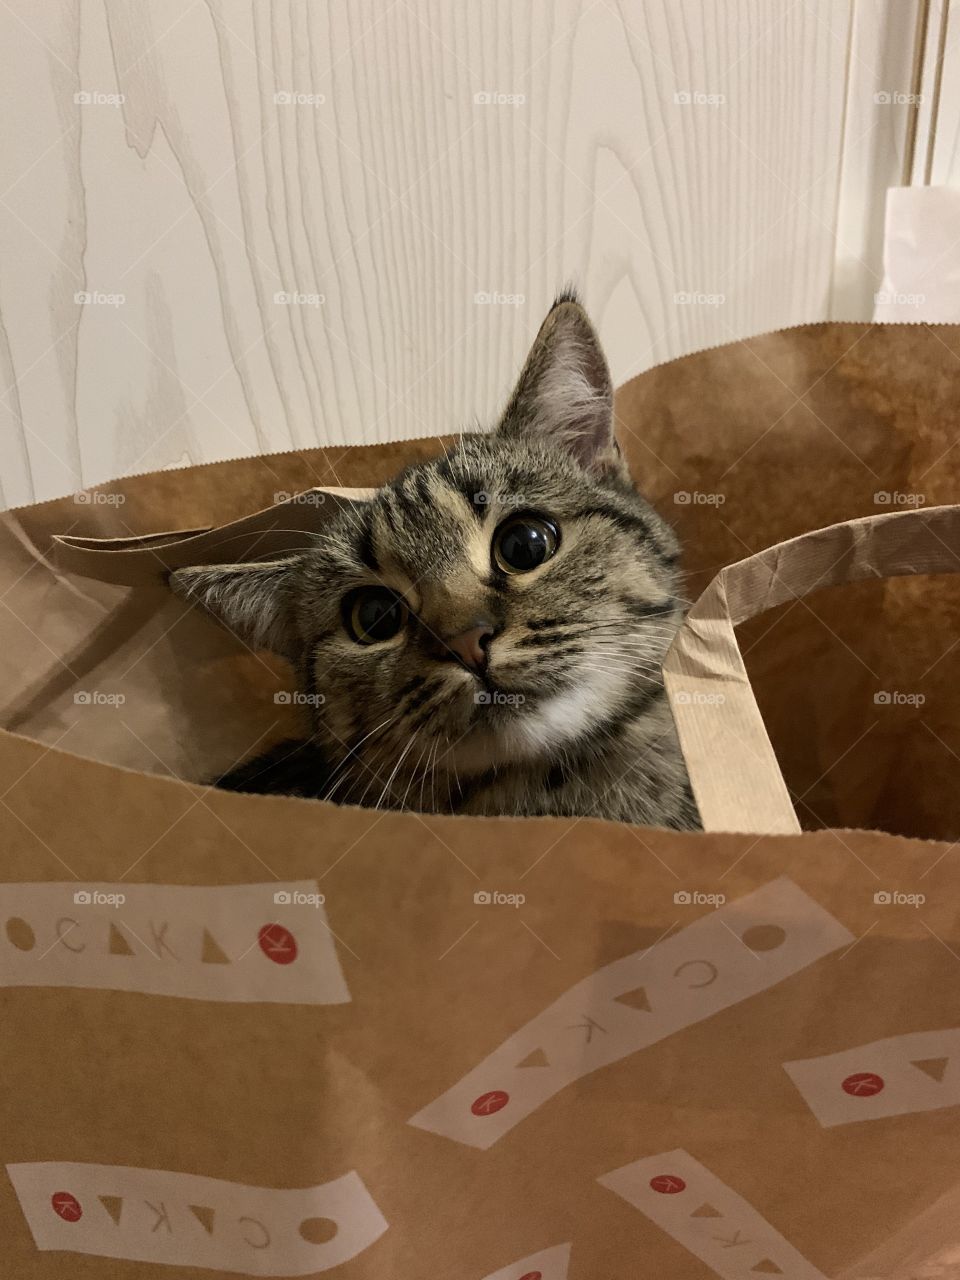 cat in the package